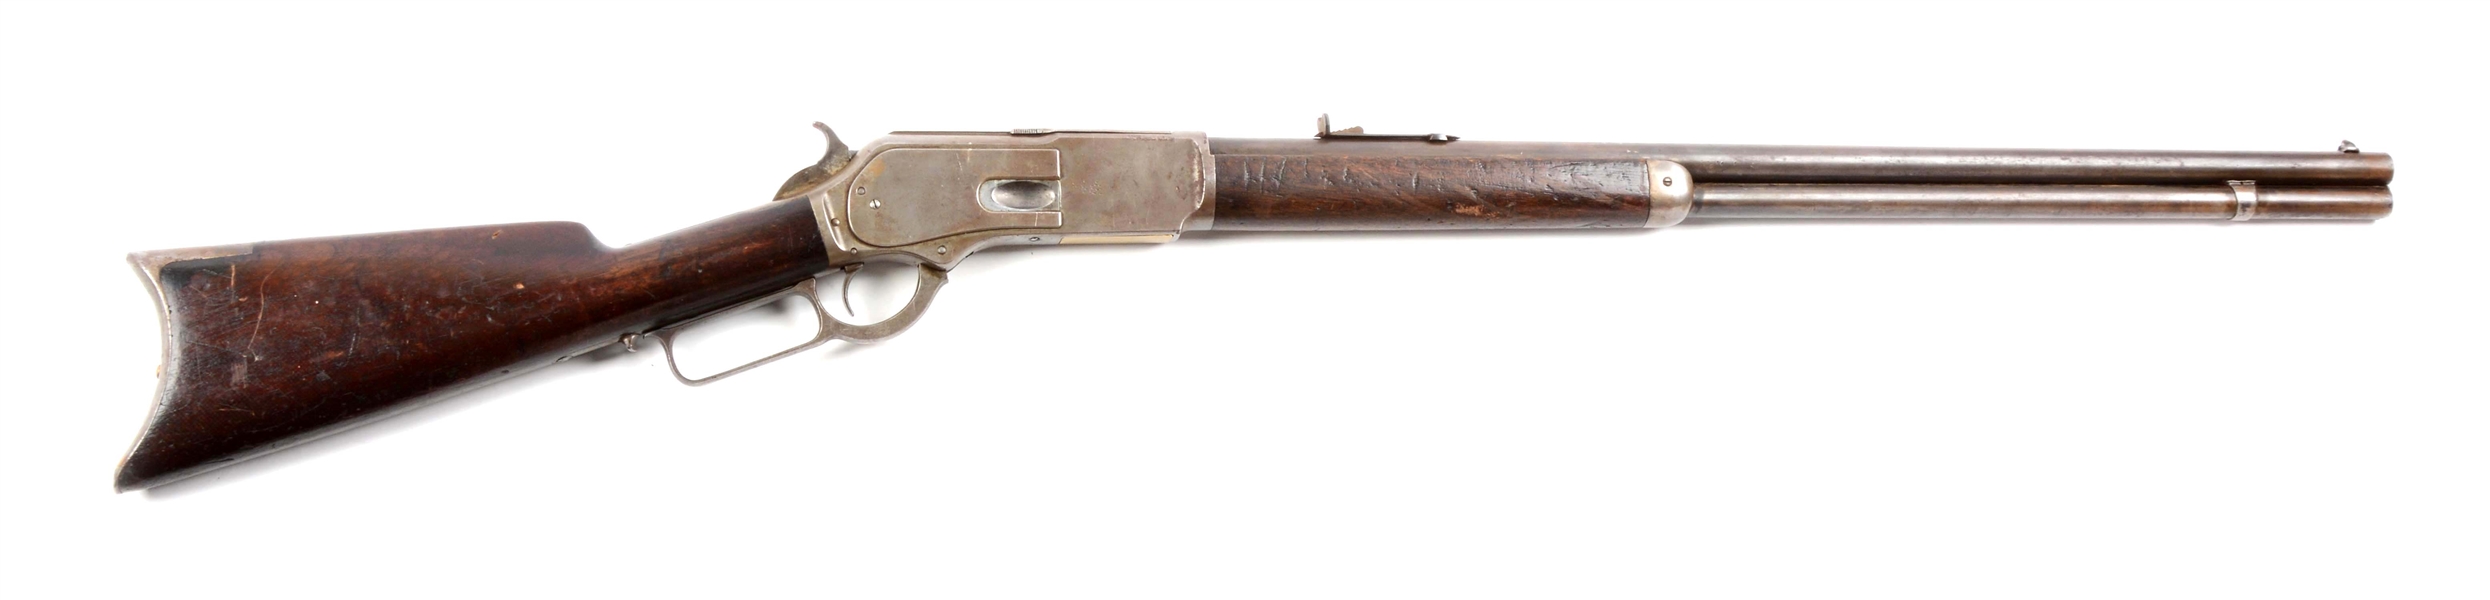 (A) WINCHESTER MODEL 1876 LEVER - ACTION RIFLE.